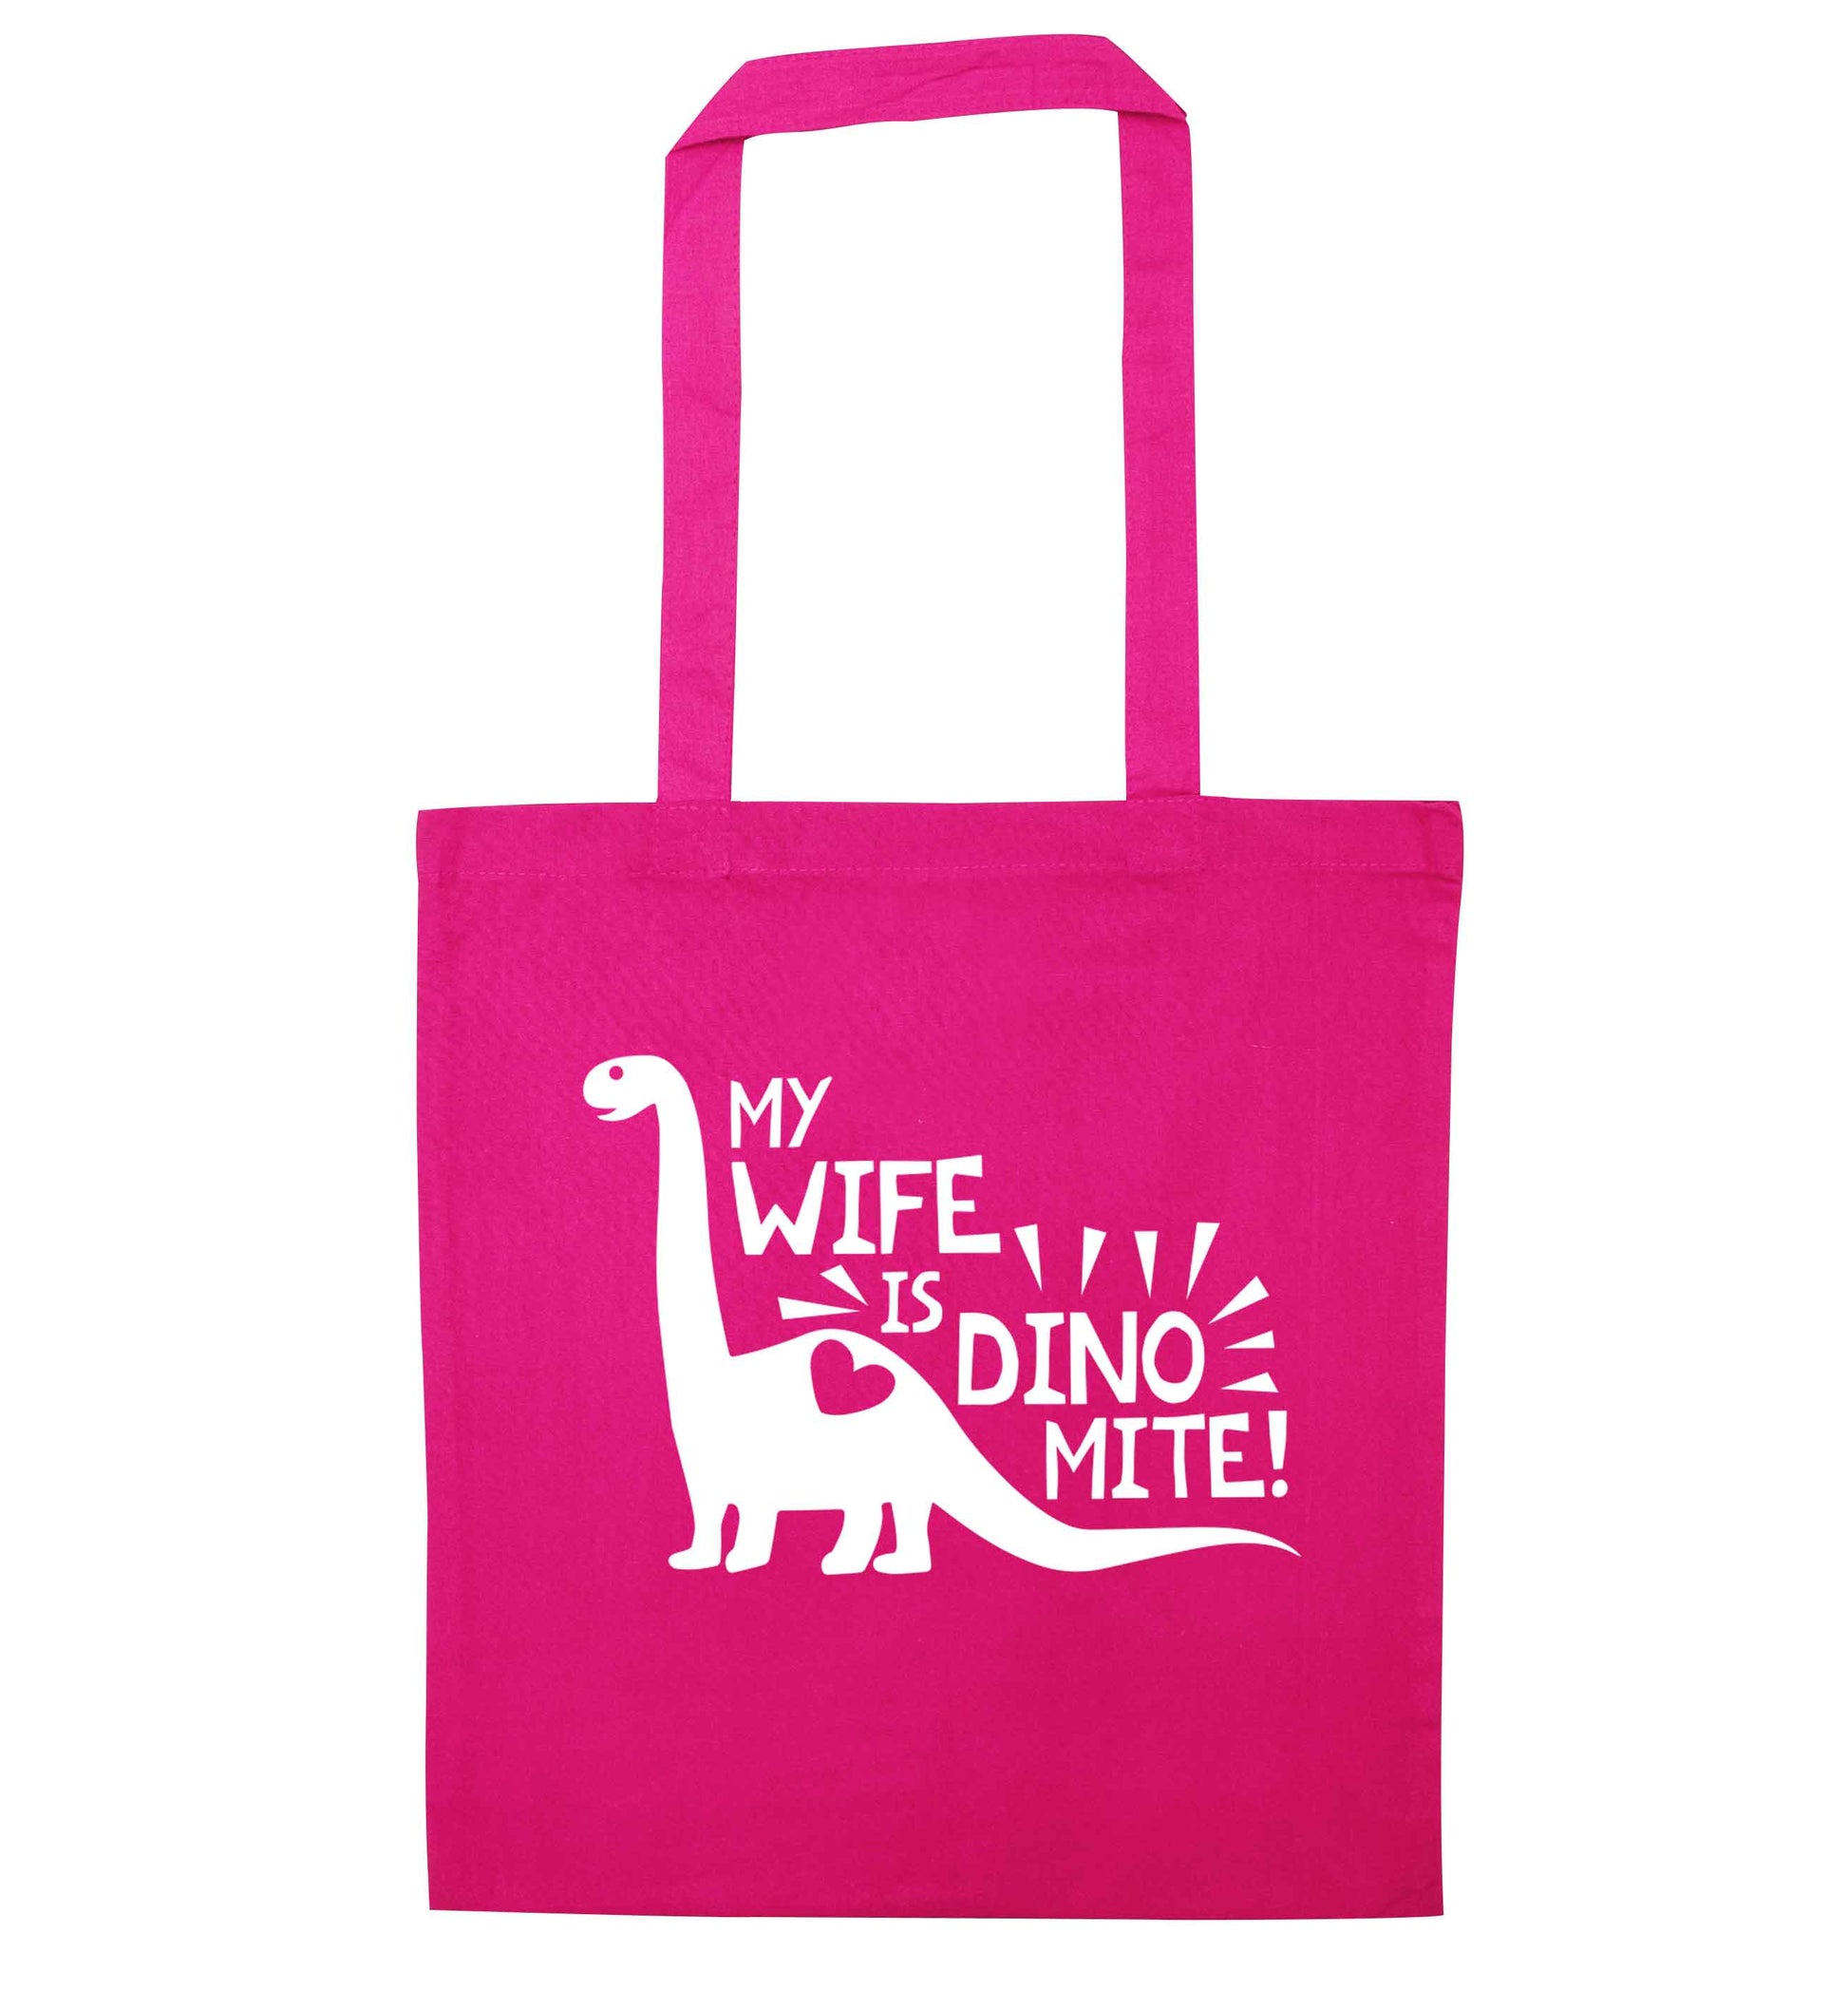 My wife is dinomite! pink tote bag